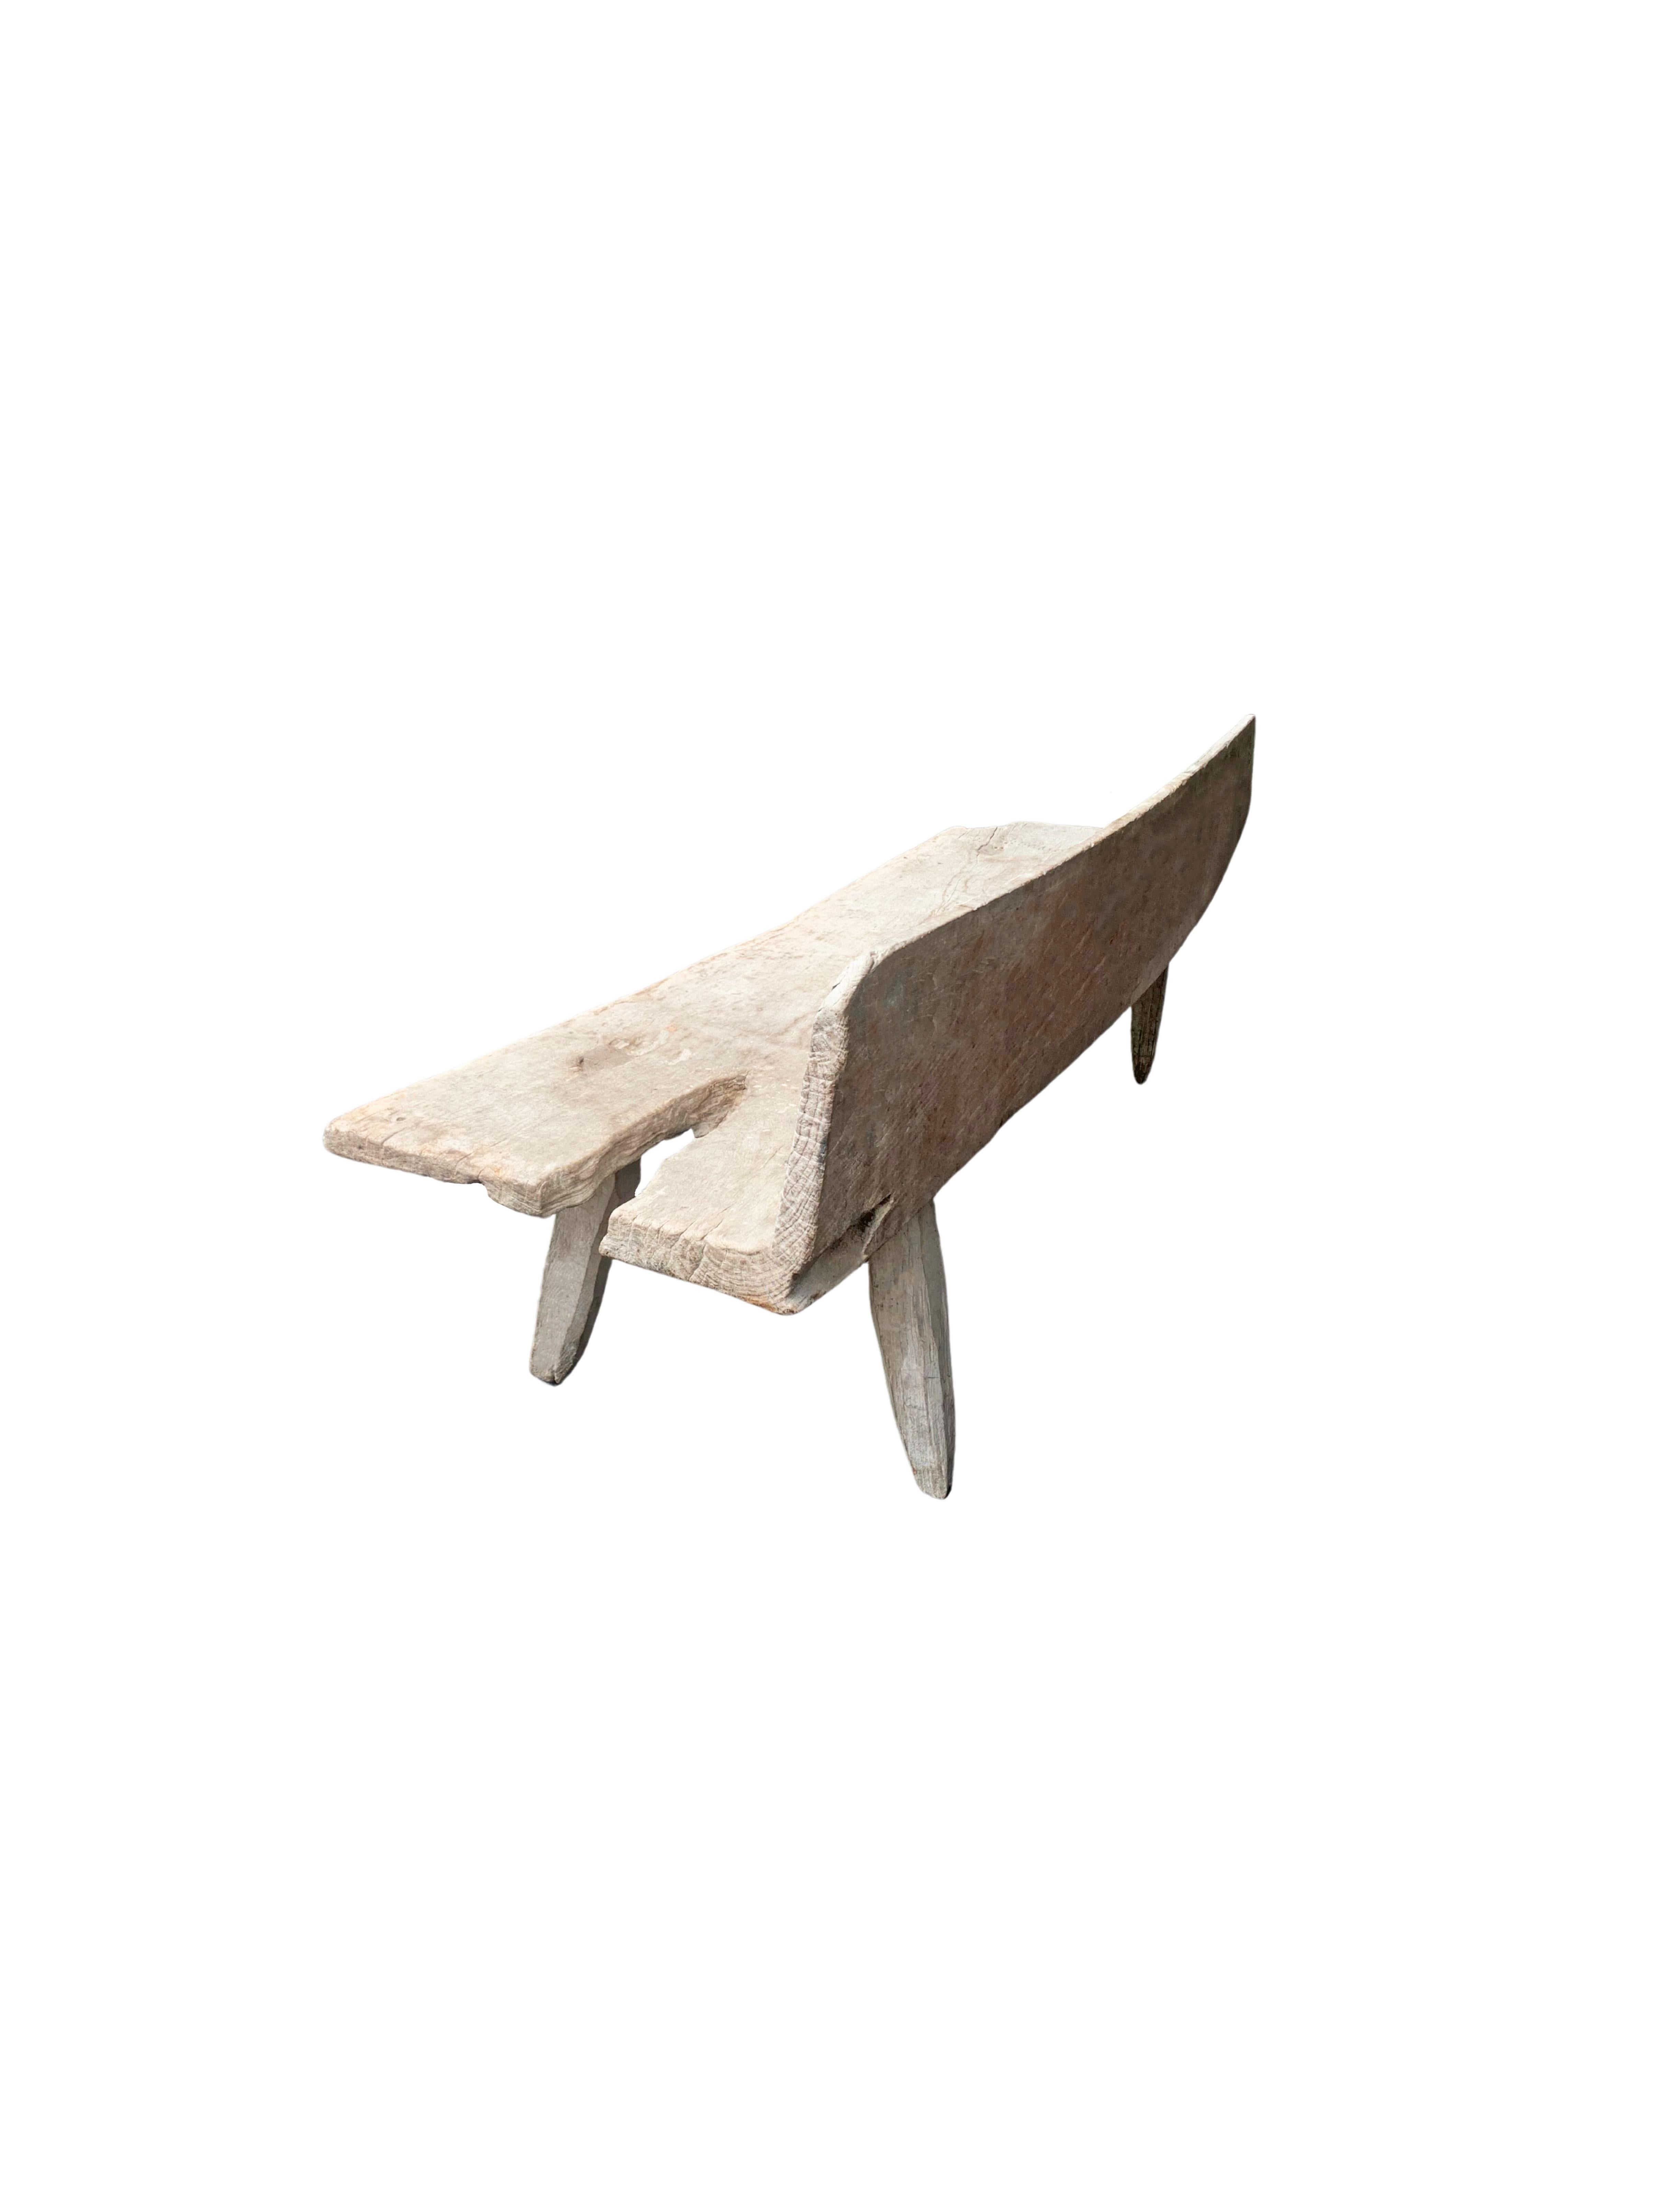 Teak Bench Hand-Carved from Madura Island, Java, Indonesia, C. 1900 For Sale 1